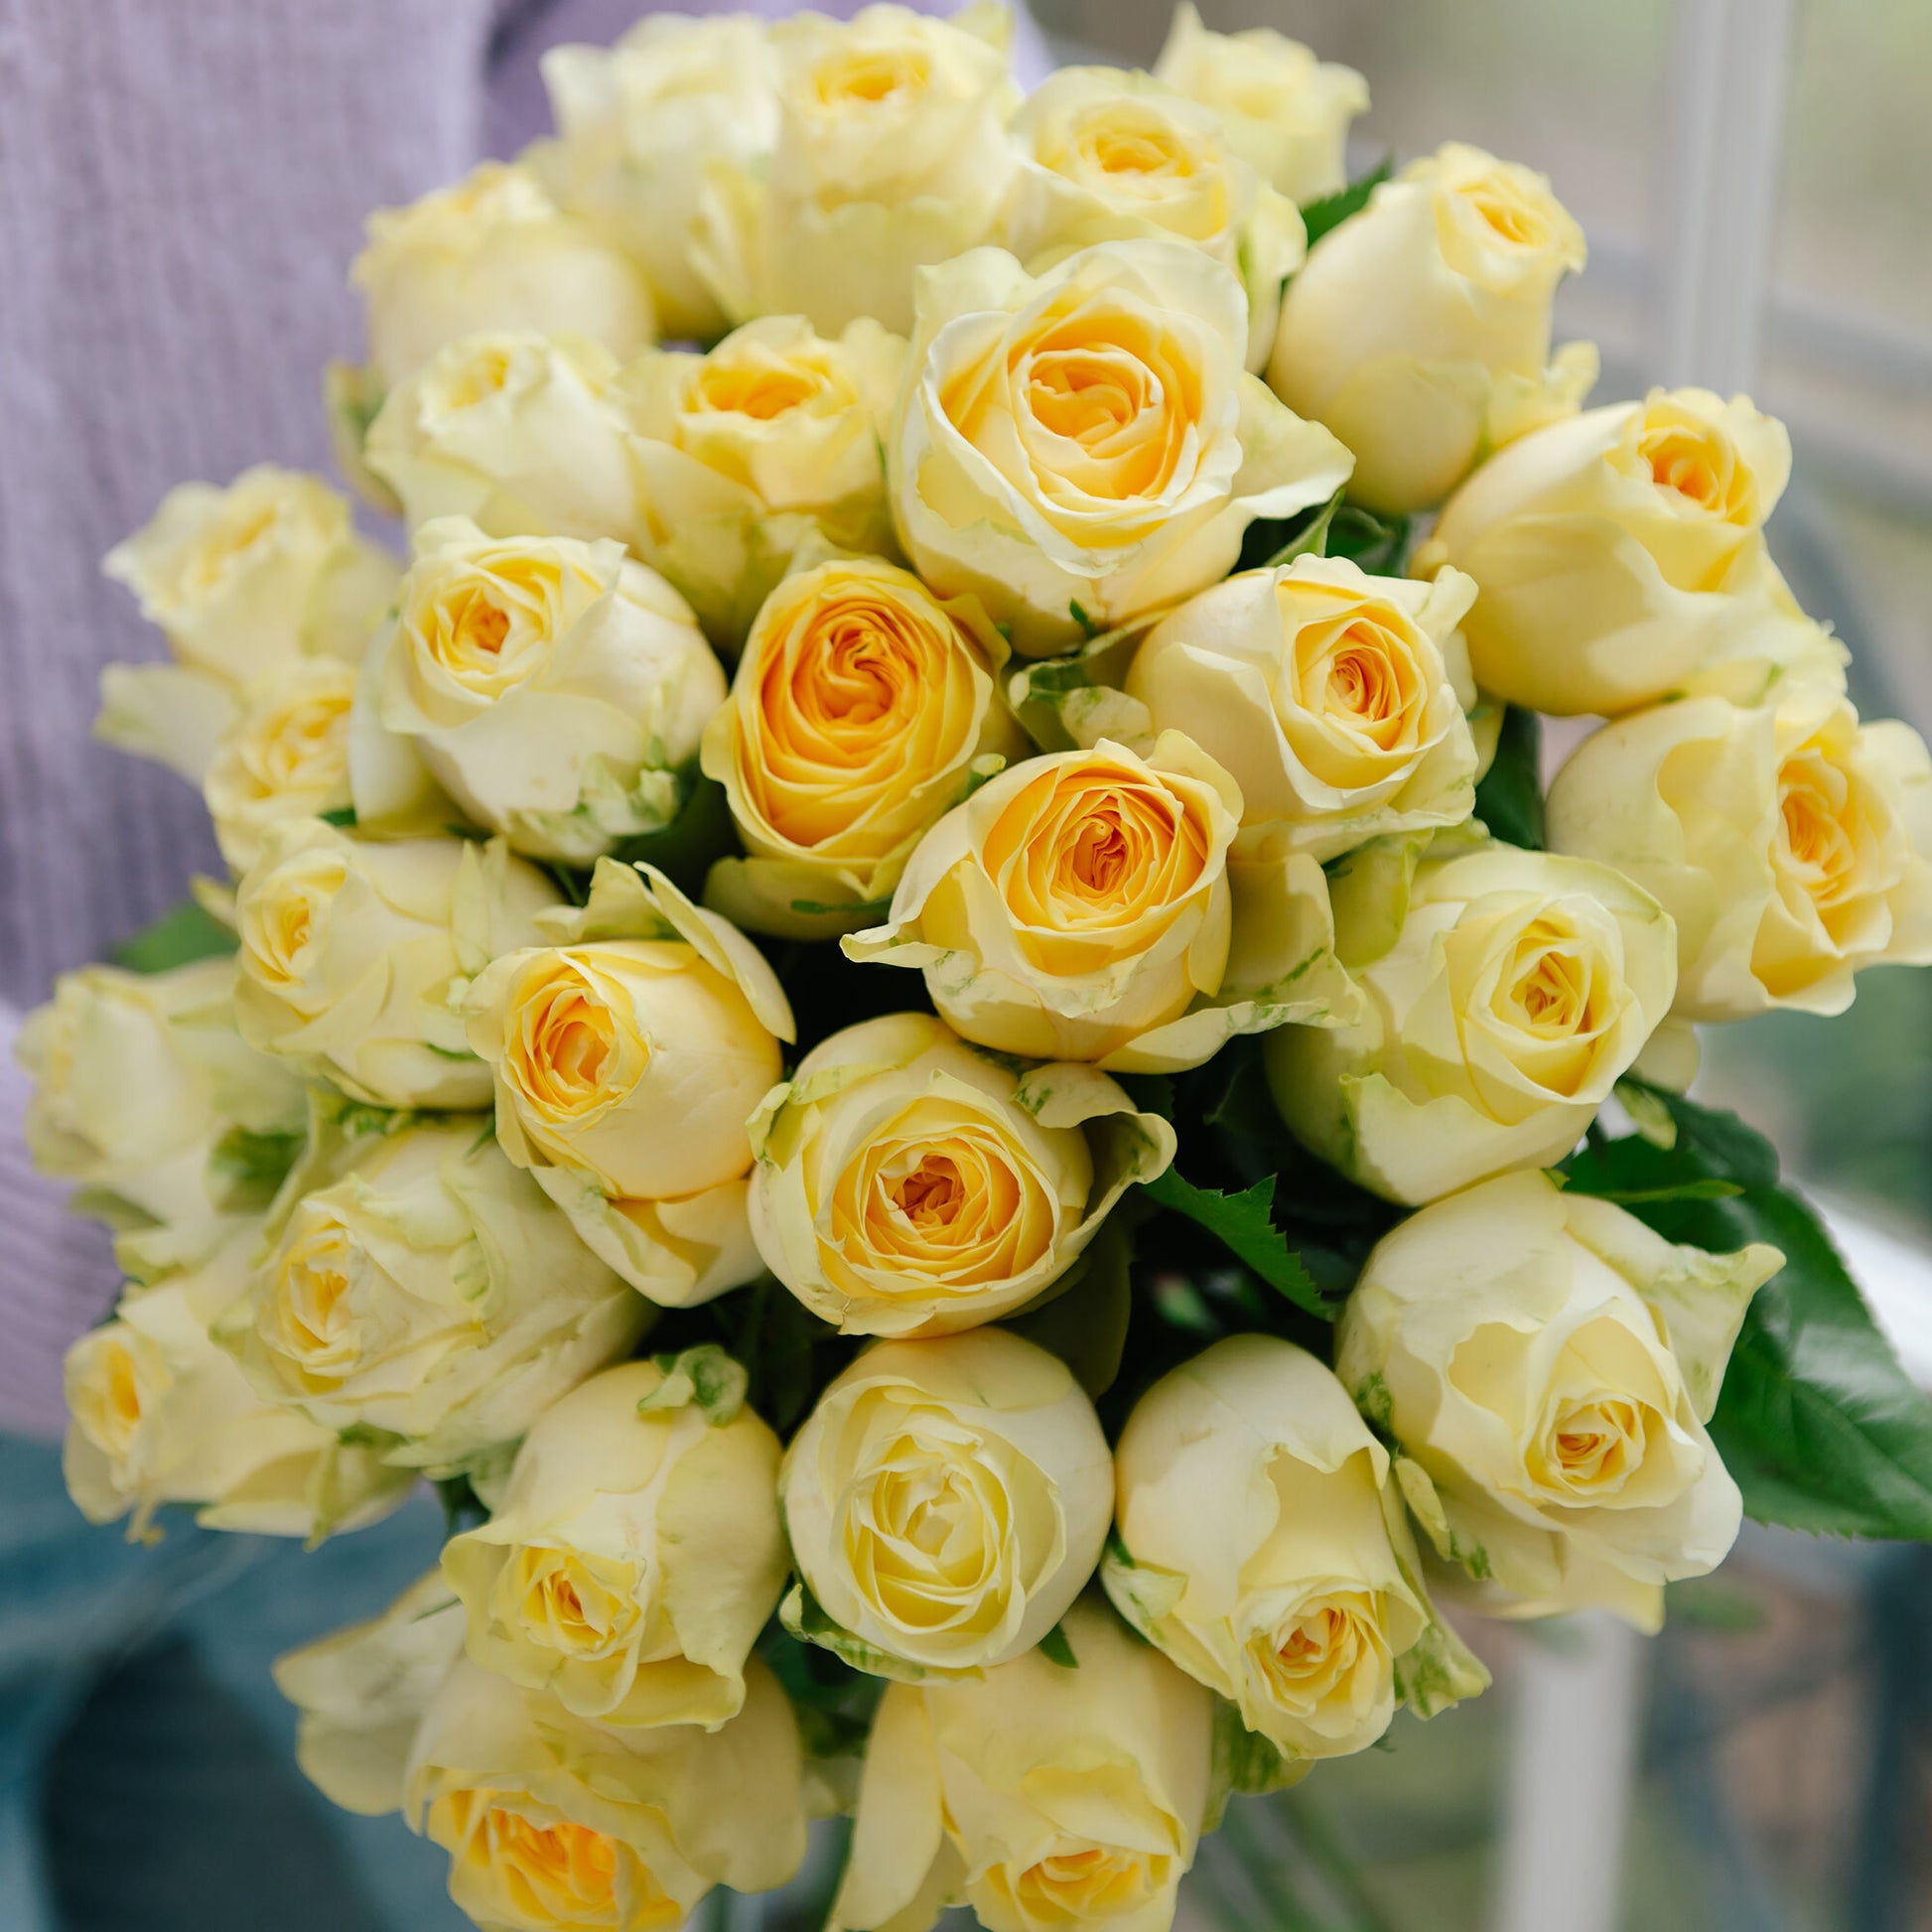 A beautiful bouquet of yellow Buttercup Garden Roses and complementary seasonal blooms arranged in a stunning display by expert florists. The bright yellow roses with their round heads and high petal counts bring a burst of color and happiness to any occasion.